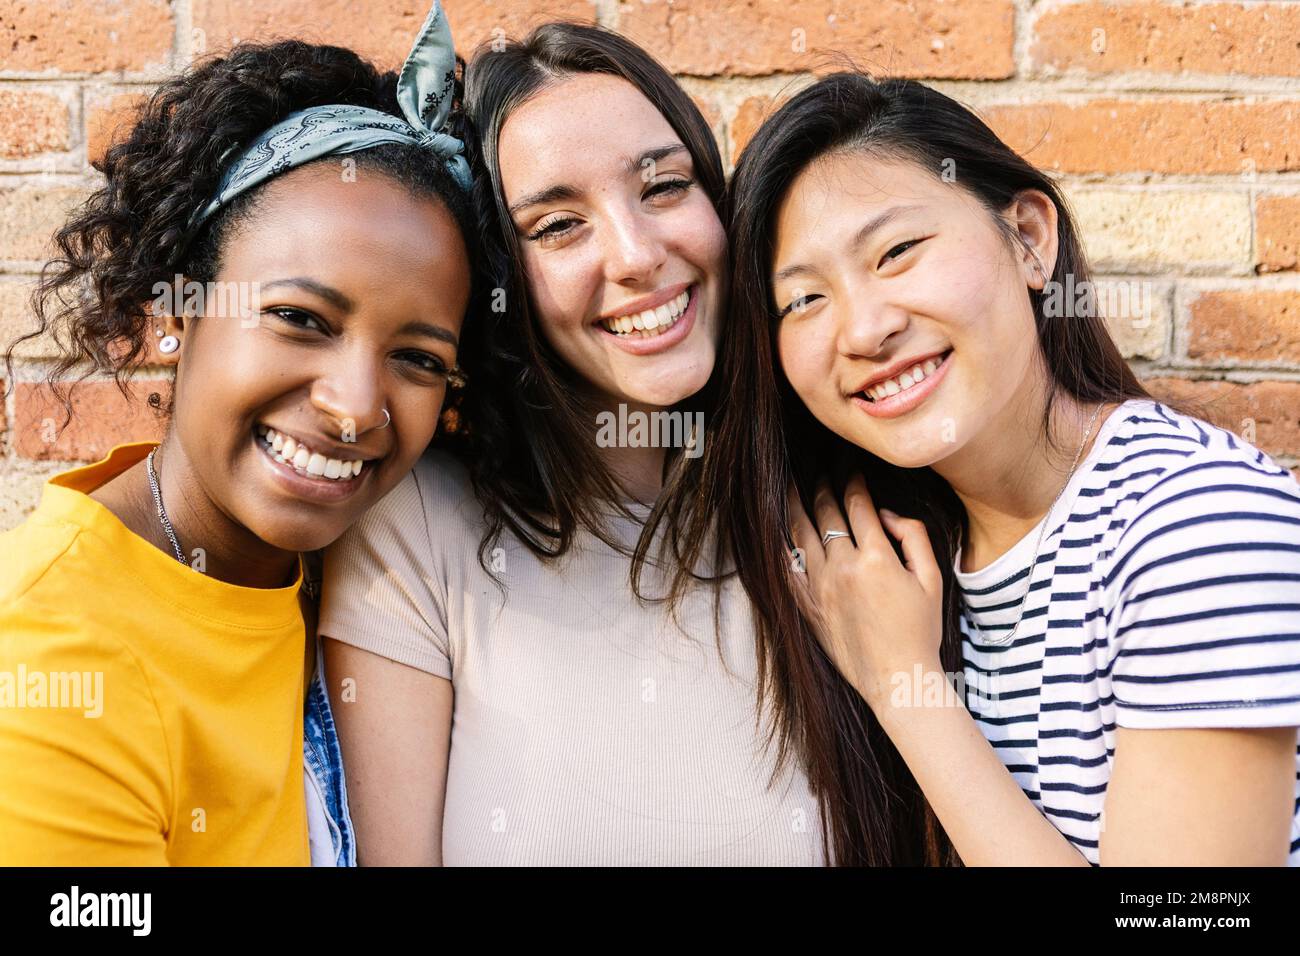 Smiling portrait of three young diverse female friends looking at camera outdoor Stock Photo